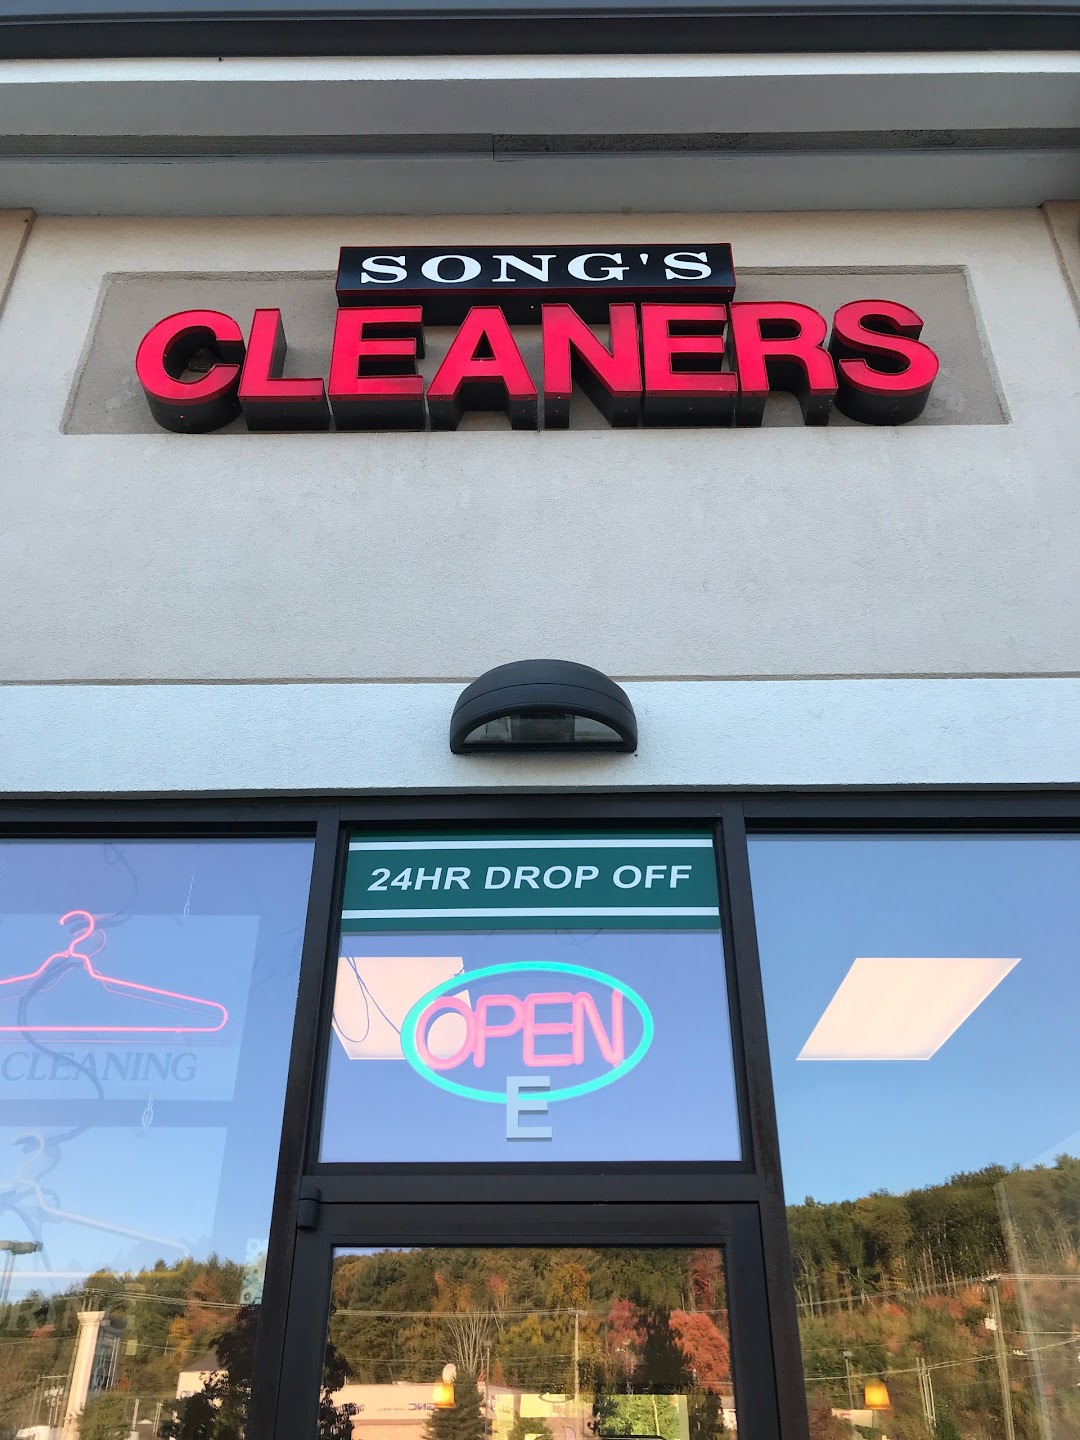 Songs Cleaners